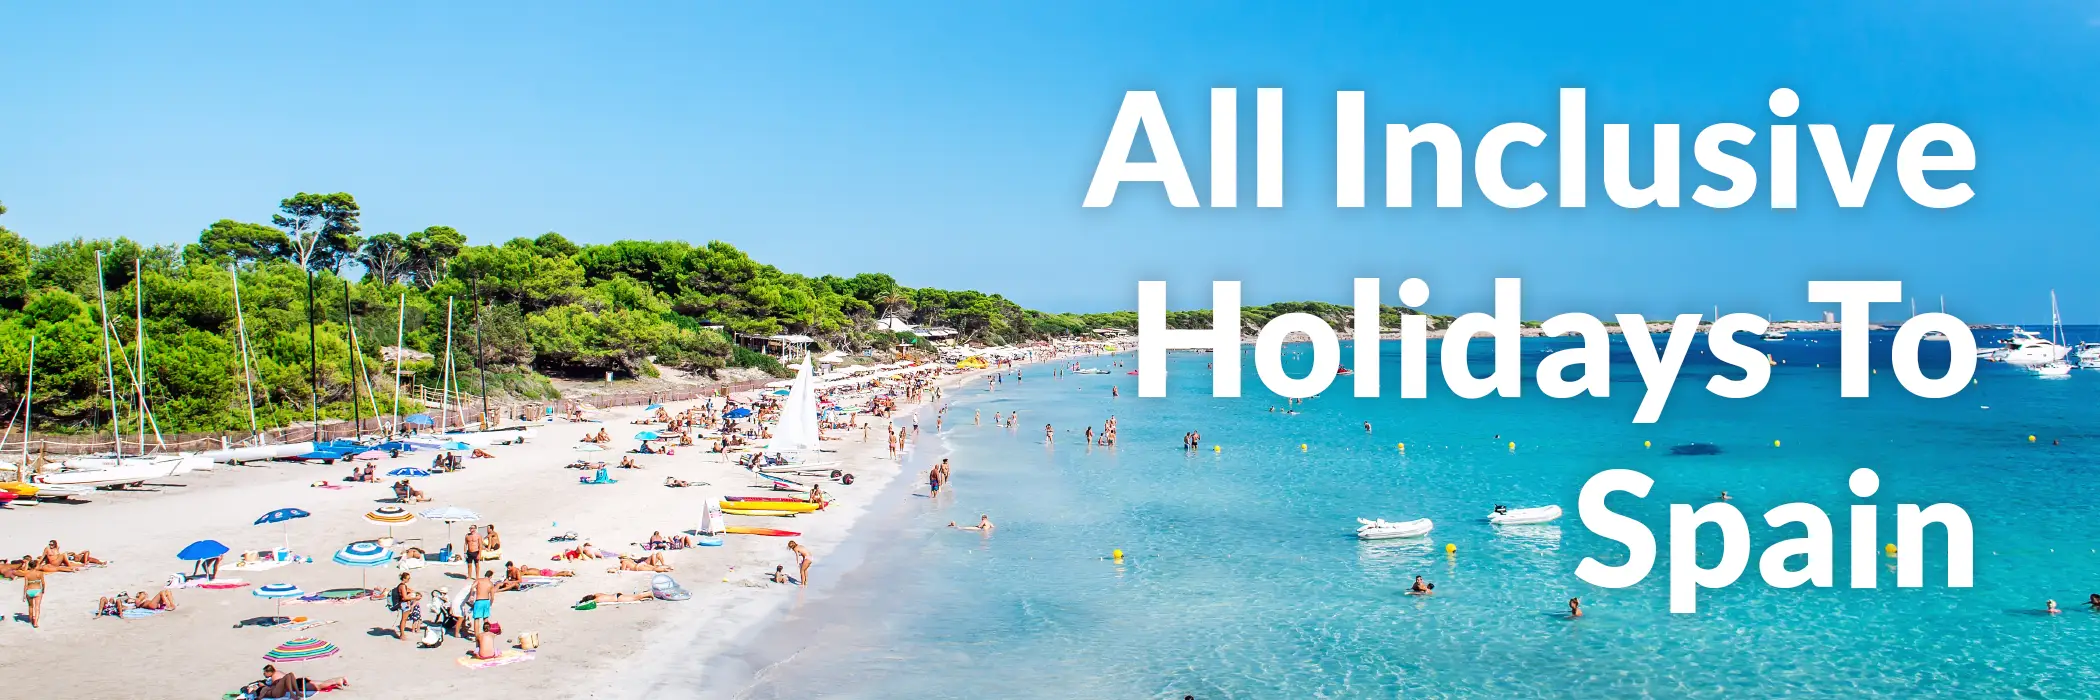 All inclusive holidays to Spain